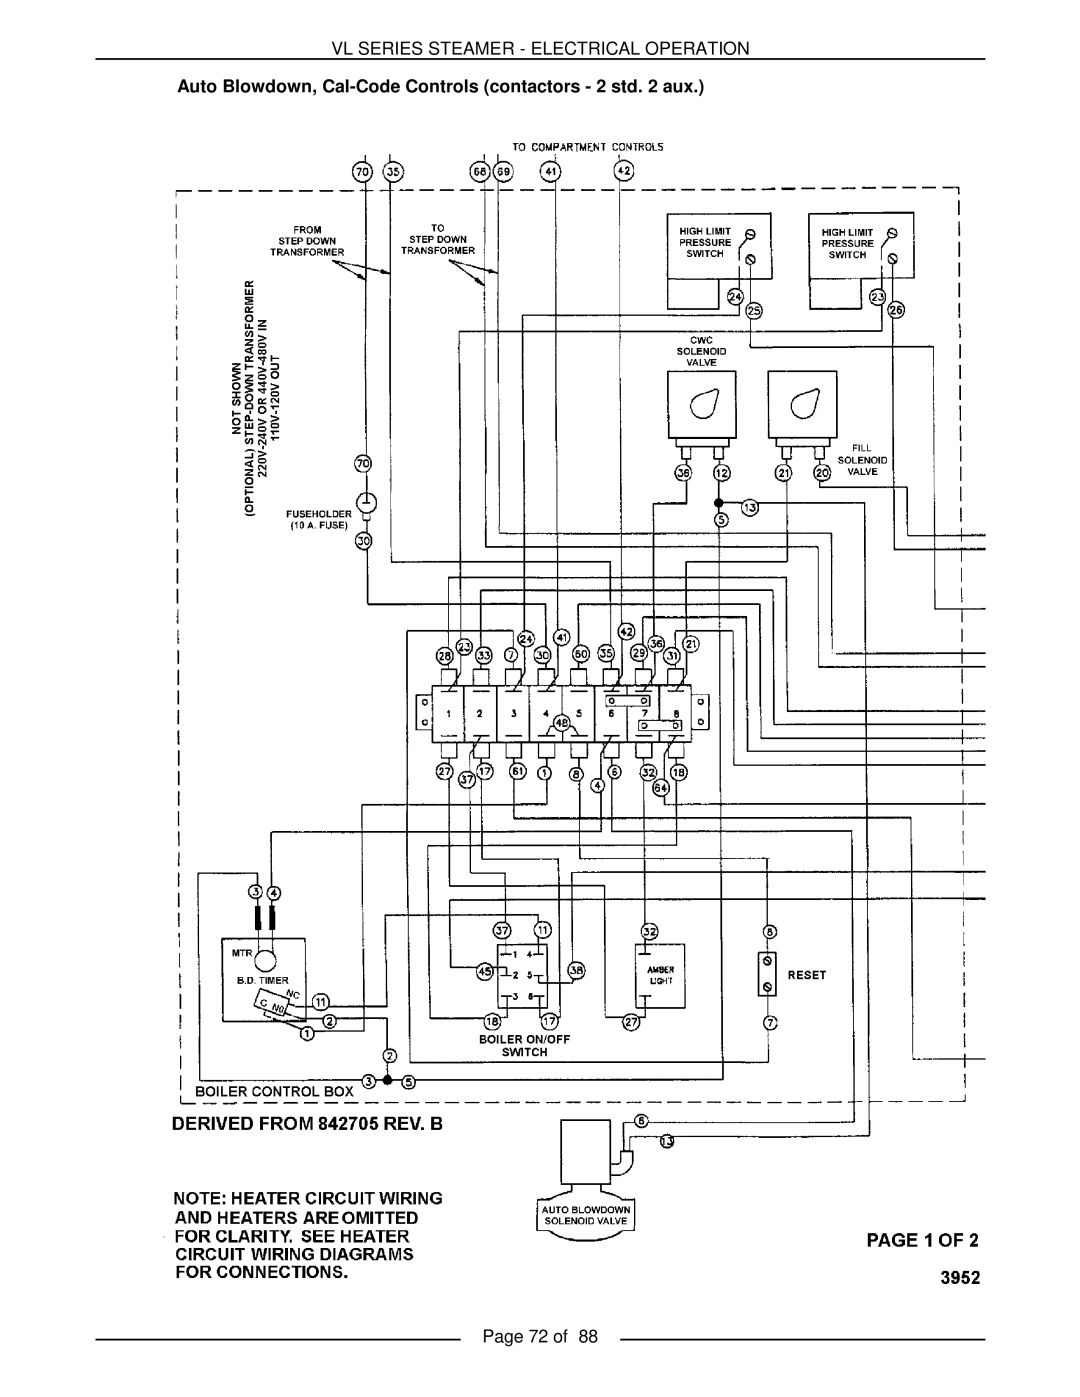 Vulcan-Hart VL3GMS, VL2GMS, VL3GAS, VL2GAS, VL2GSS, VL3GSS, VL3GPS, VL2GPS Vl Series Steamer - Electrical Operation, Page 72 of 